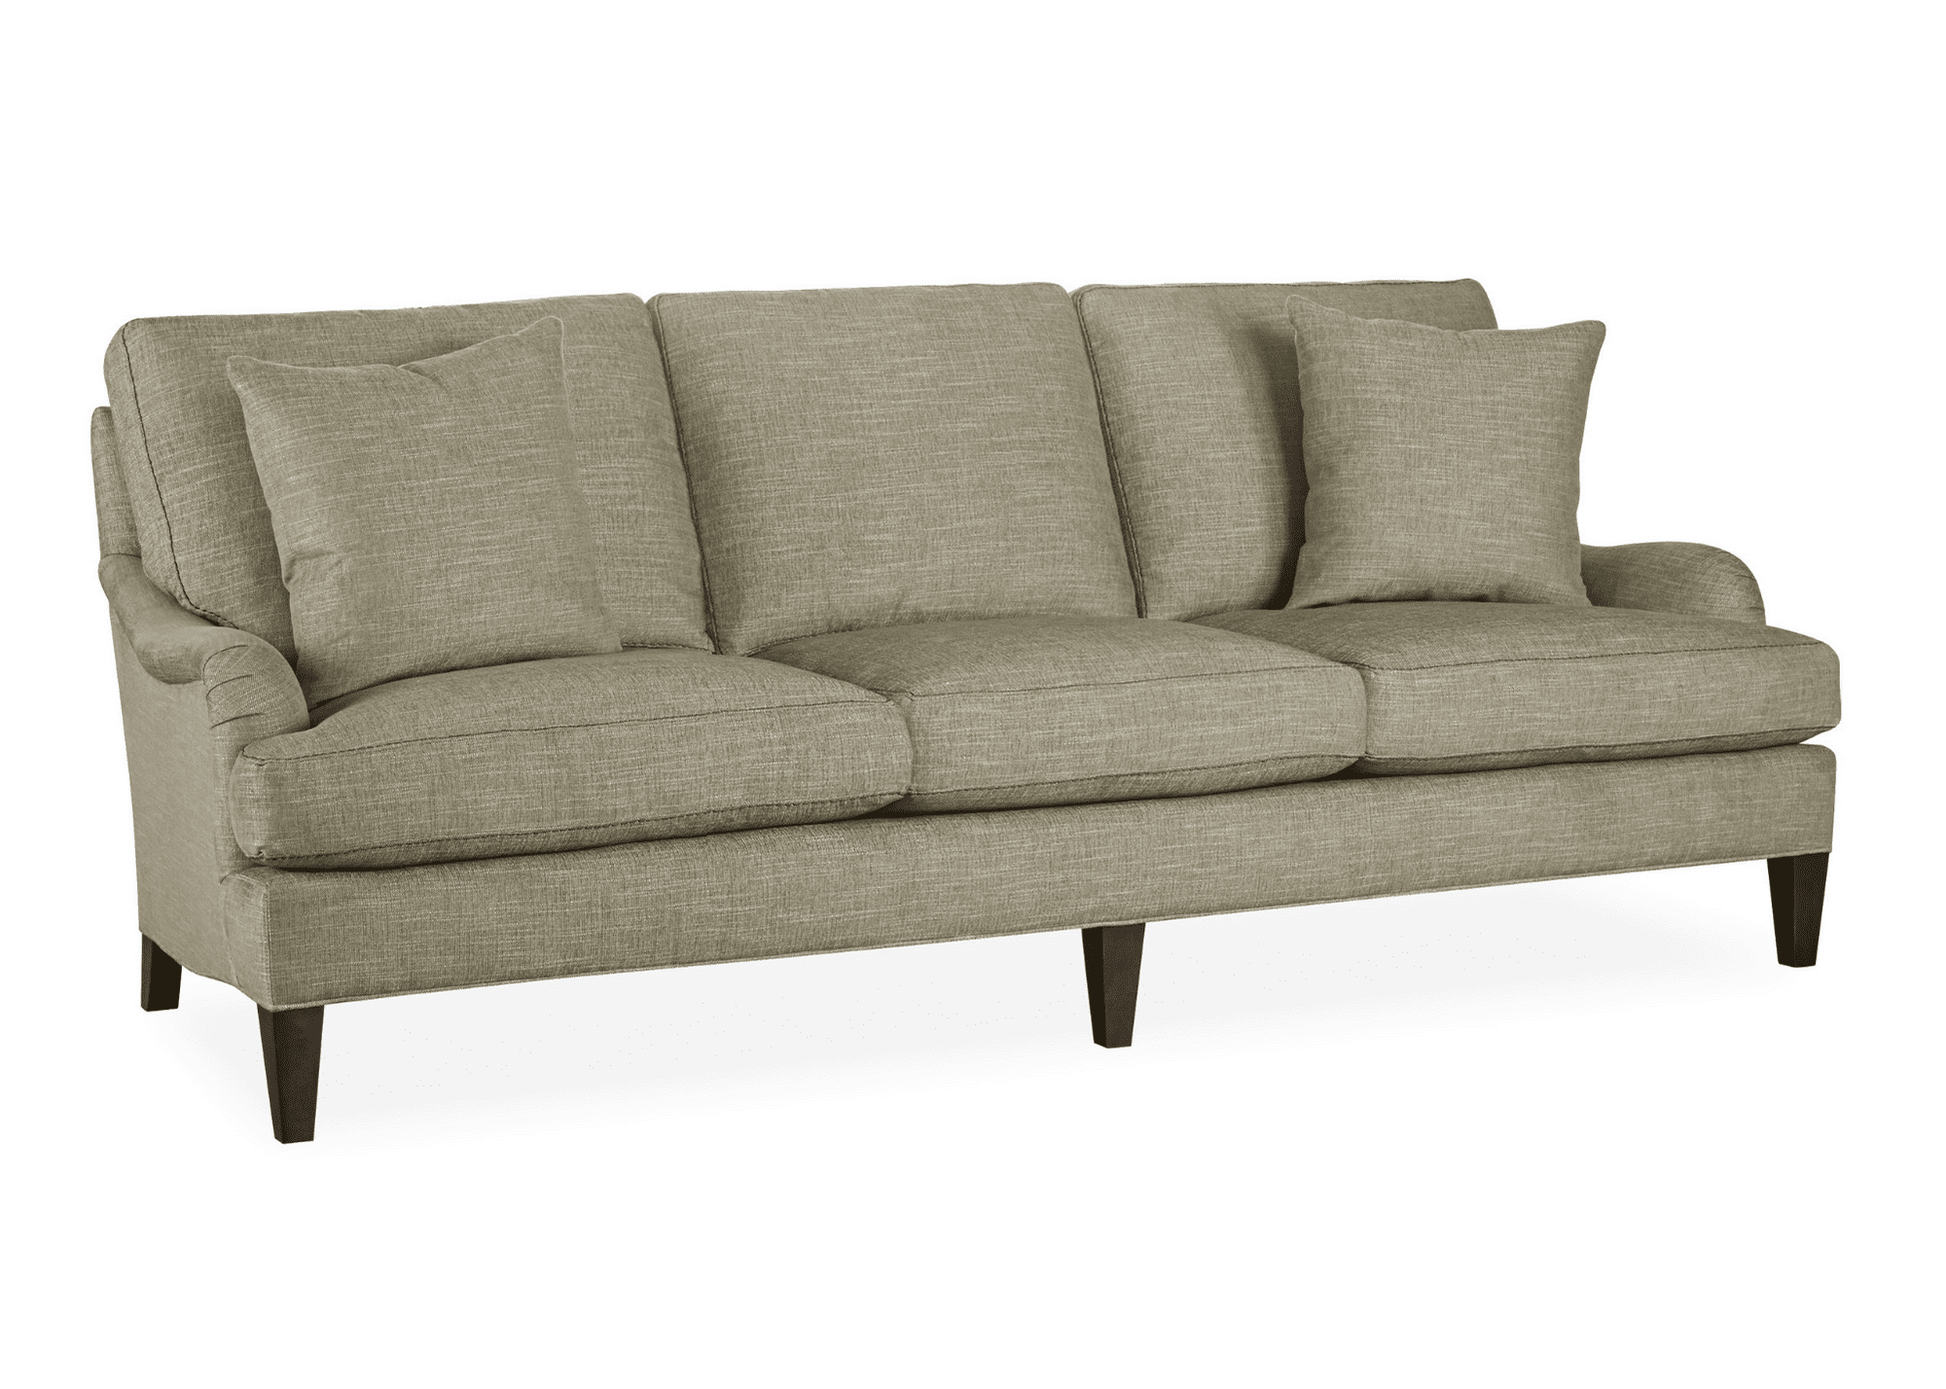 Lee Industries 1563-03 Sofa in a beige fabric with english arm. 